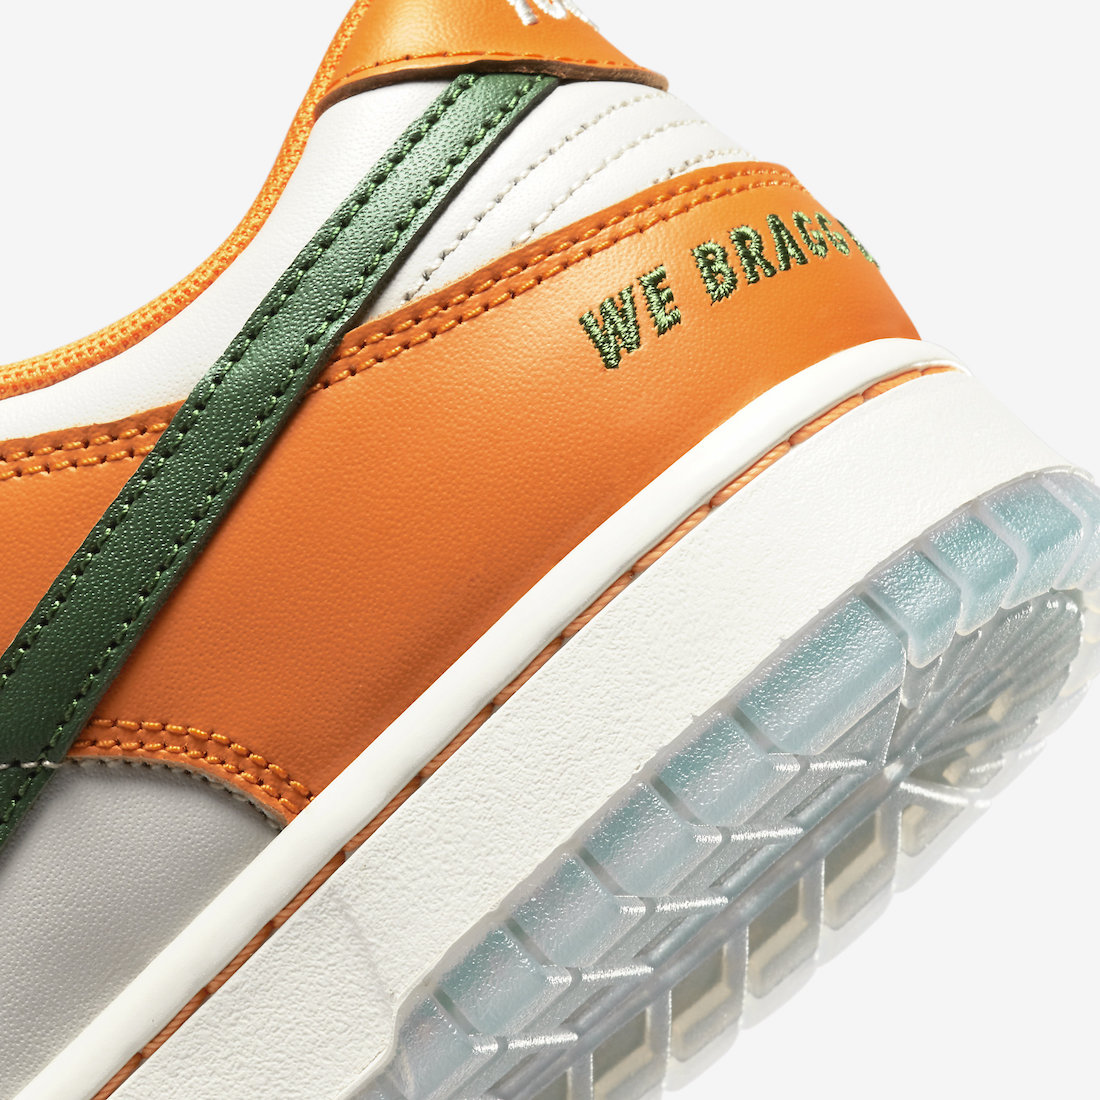 Florida AM Nike Dunk Low DR6188-800 Release Date Info